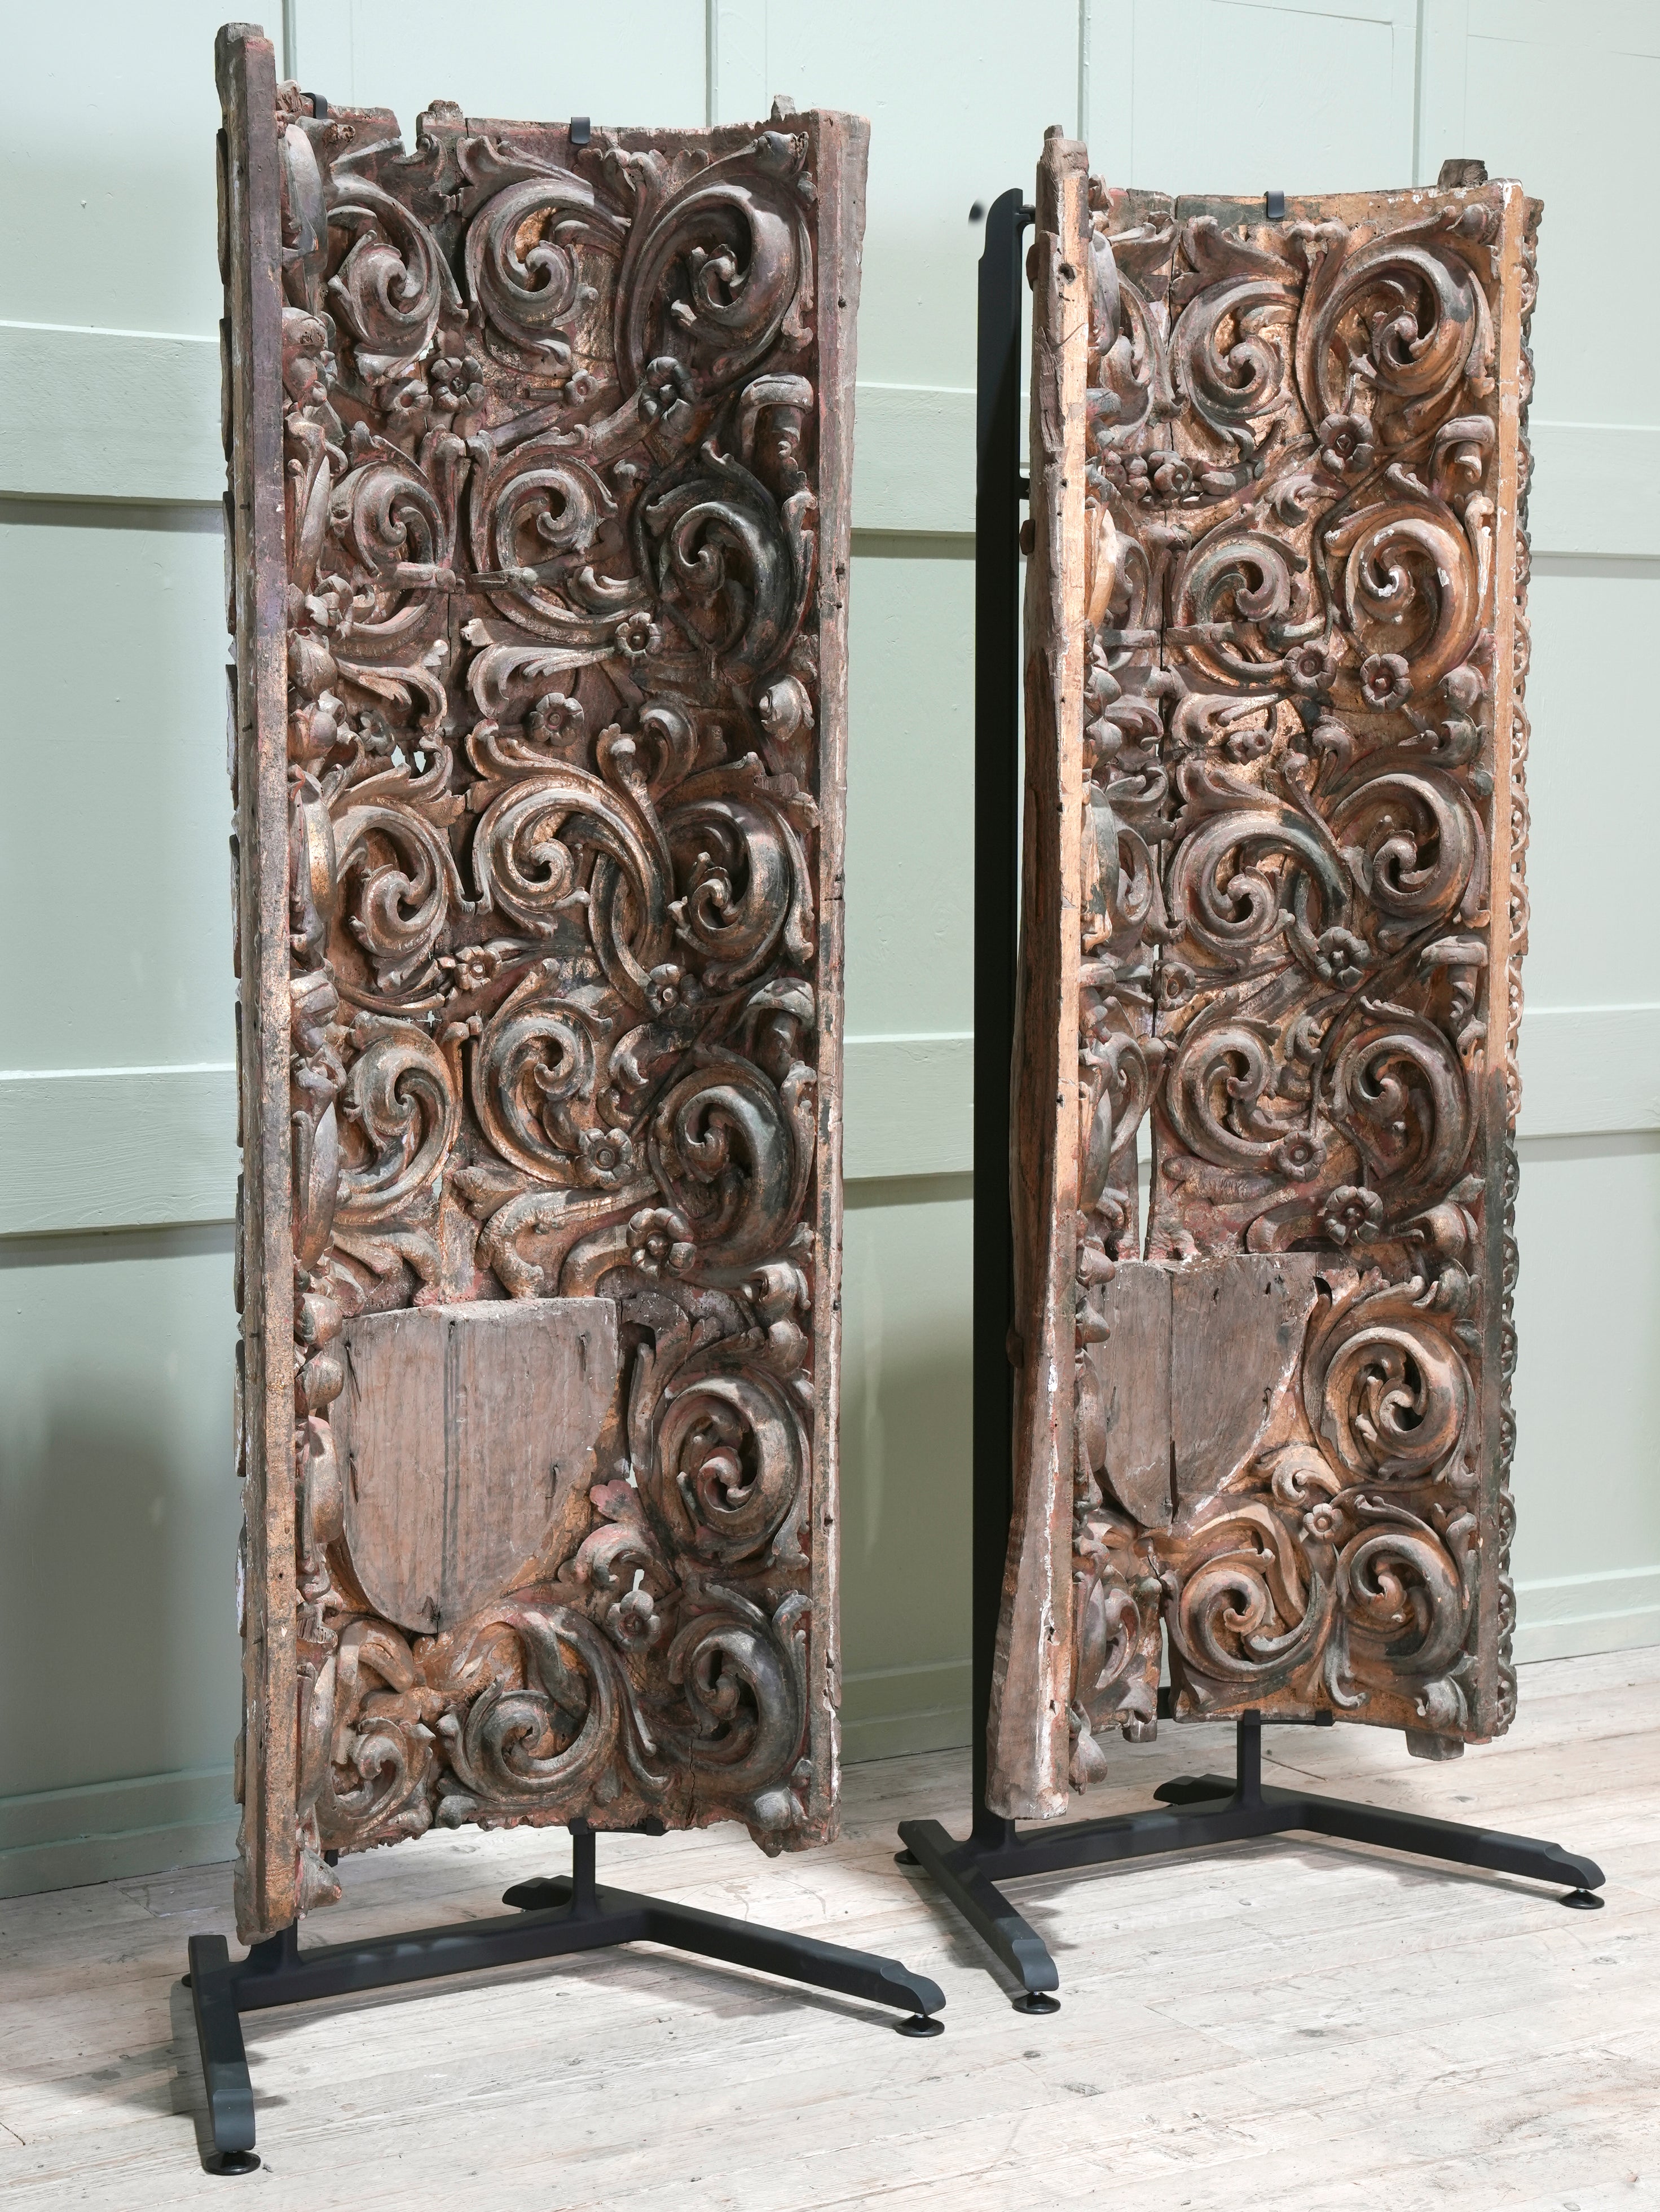 A Pair of 18th Century Portuguese Baroque Niches